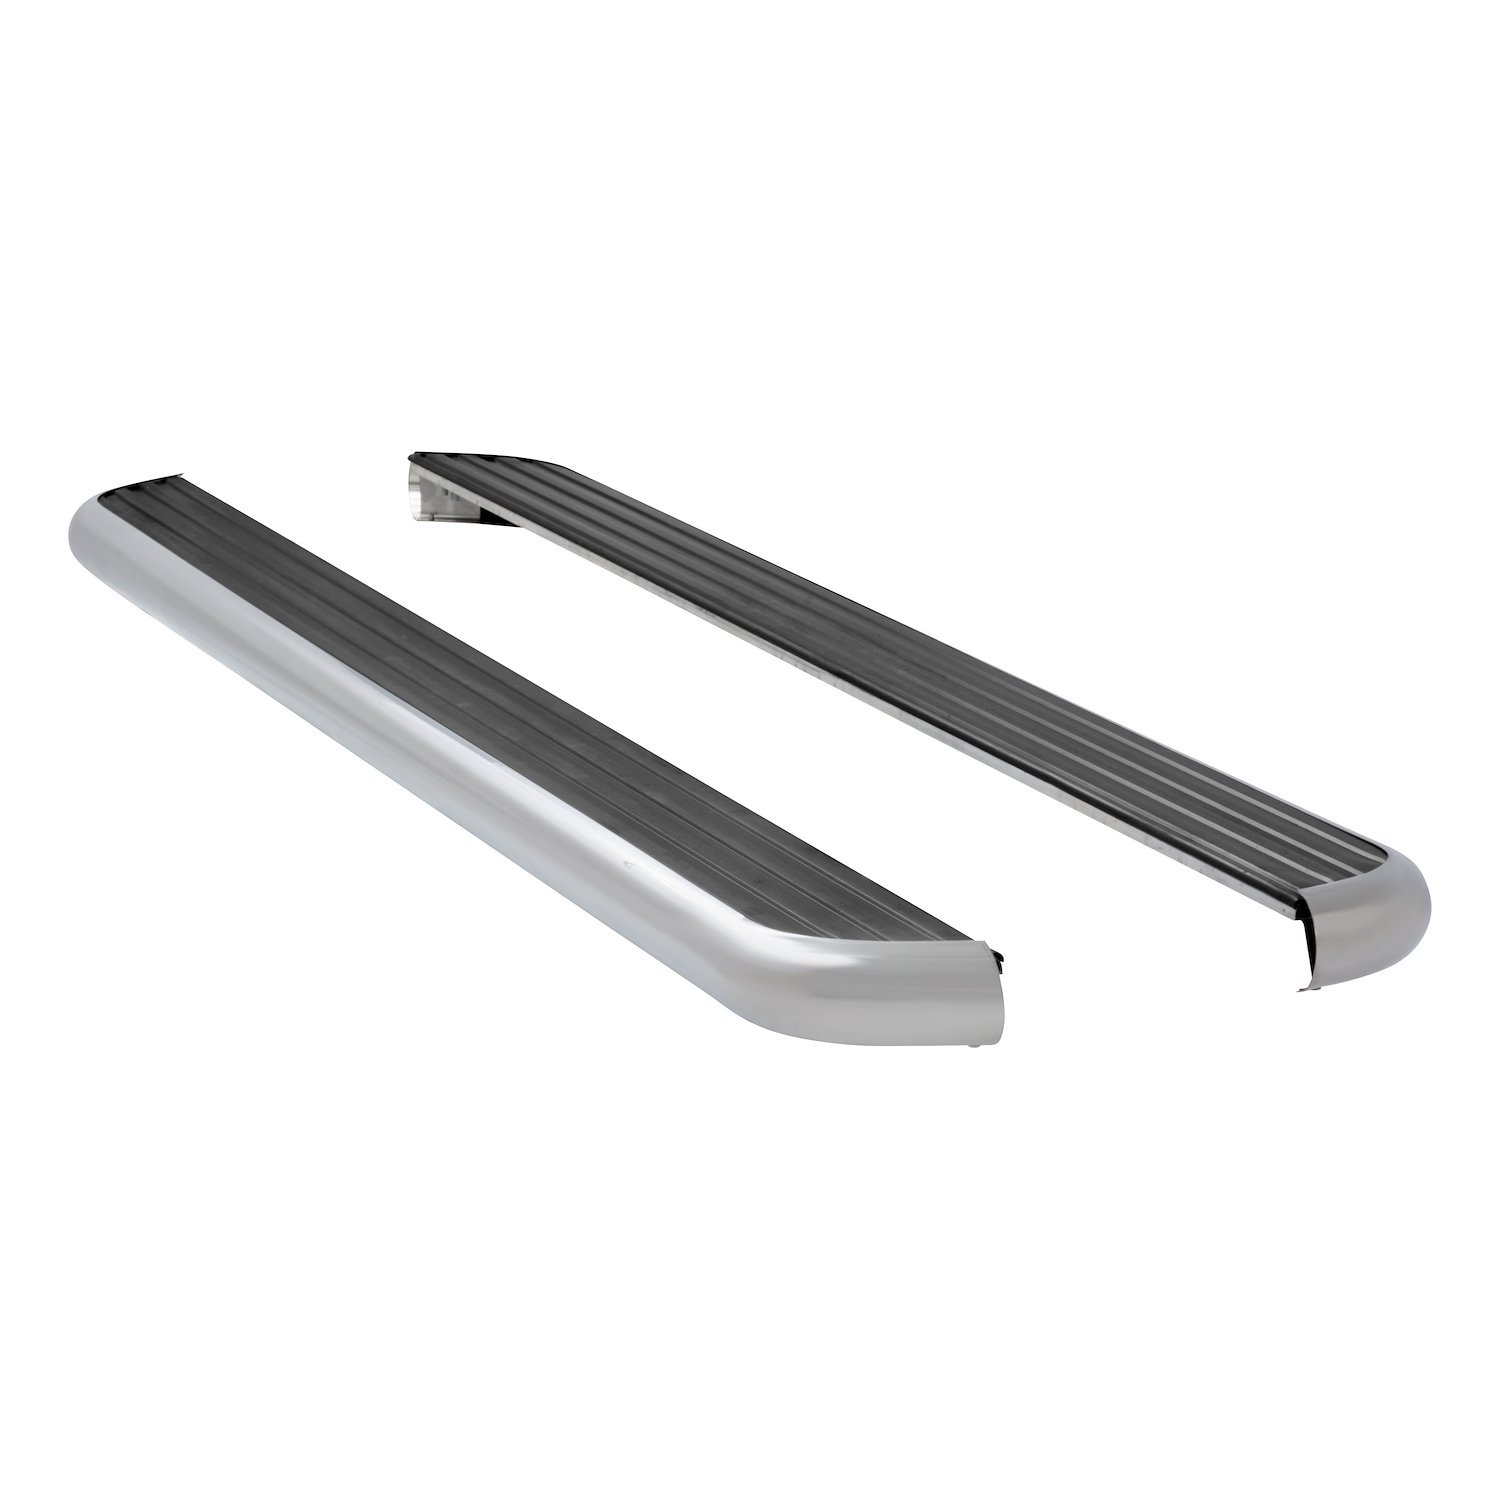 575114-571346 MegaStep 6-1/2 in. x 114 in. Aluminum Running Boards Fits Select Chevy Express, GMC Savana